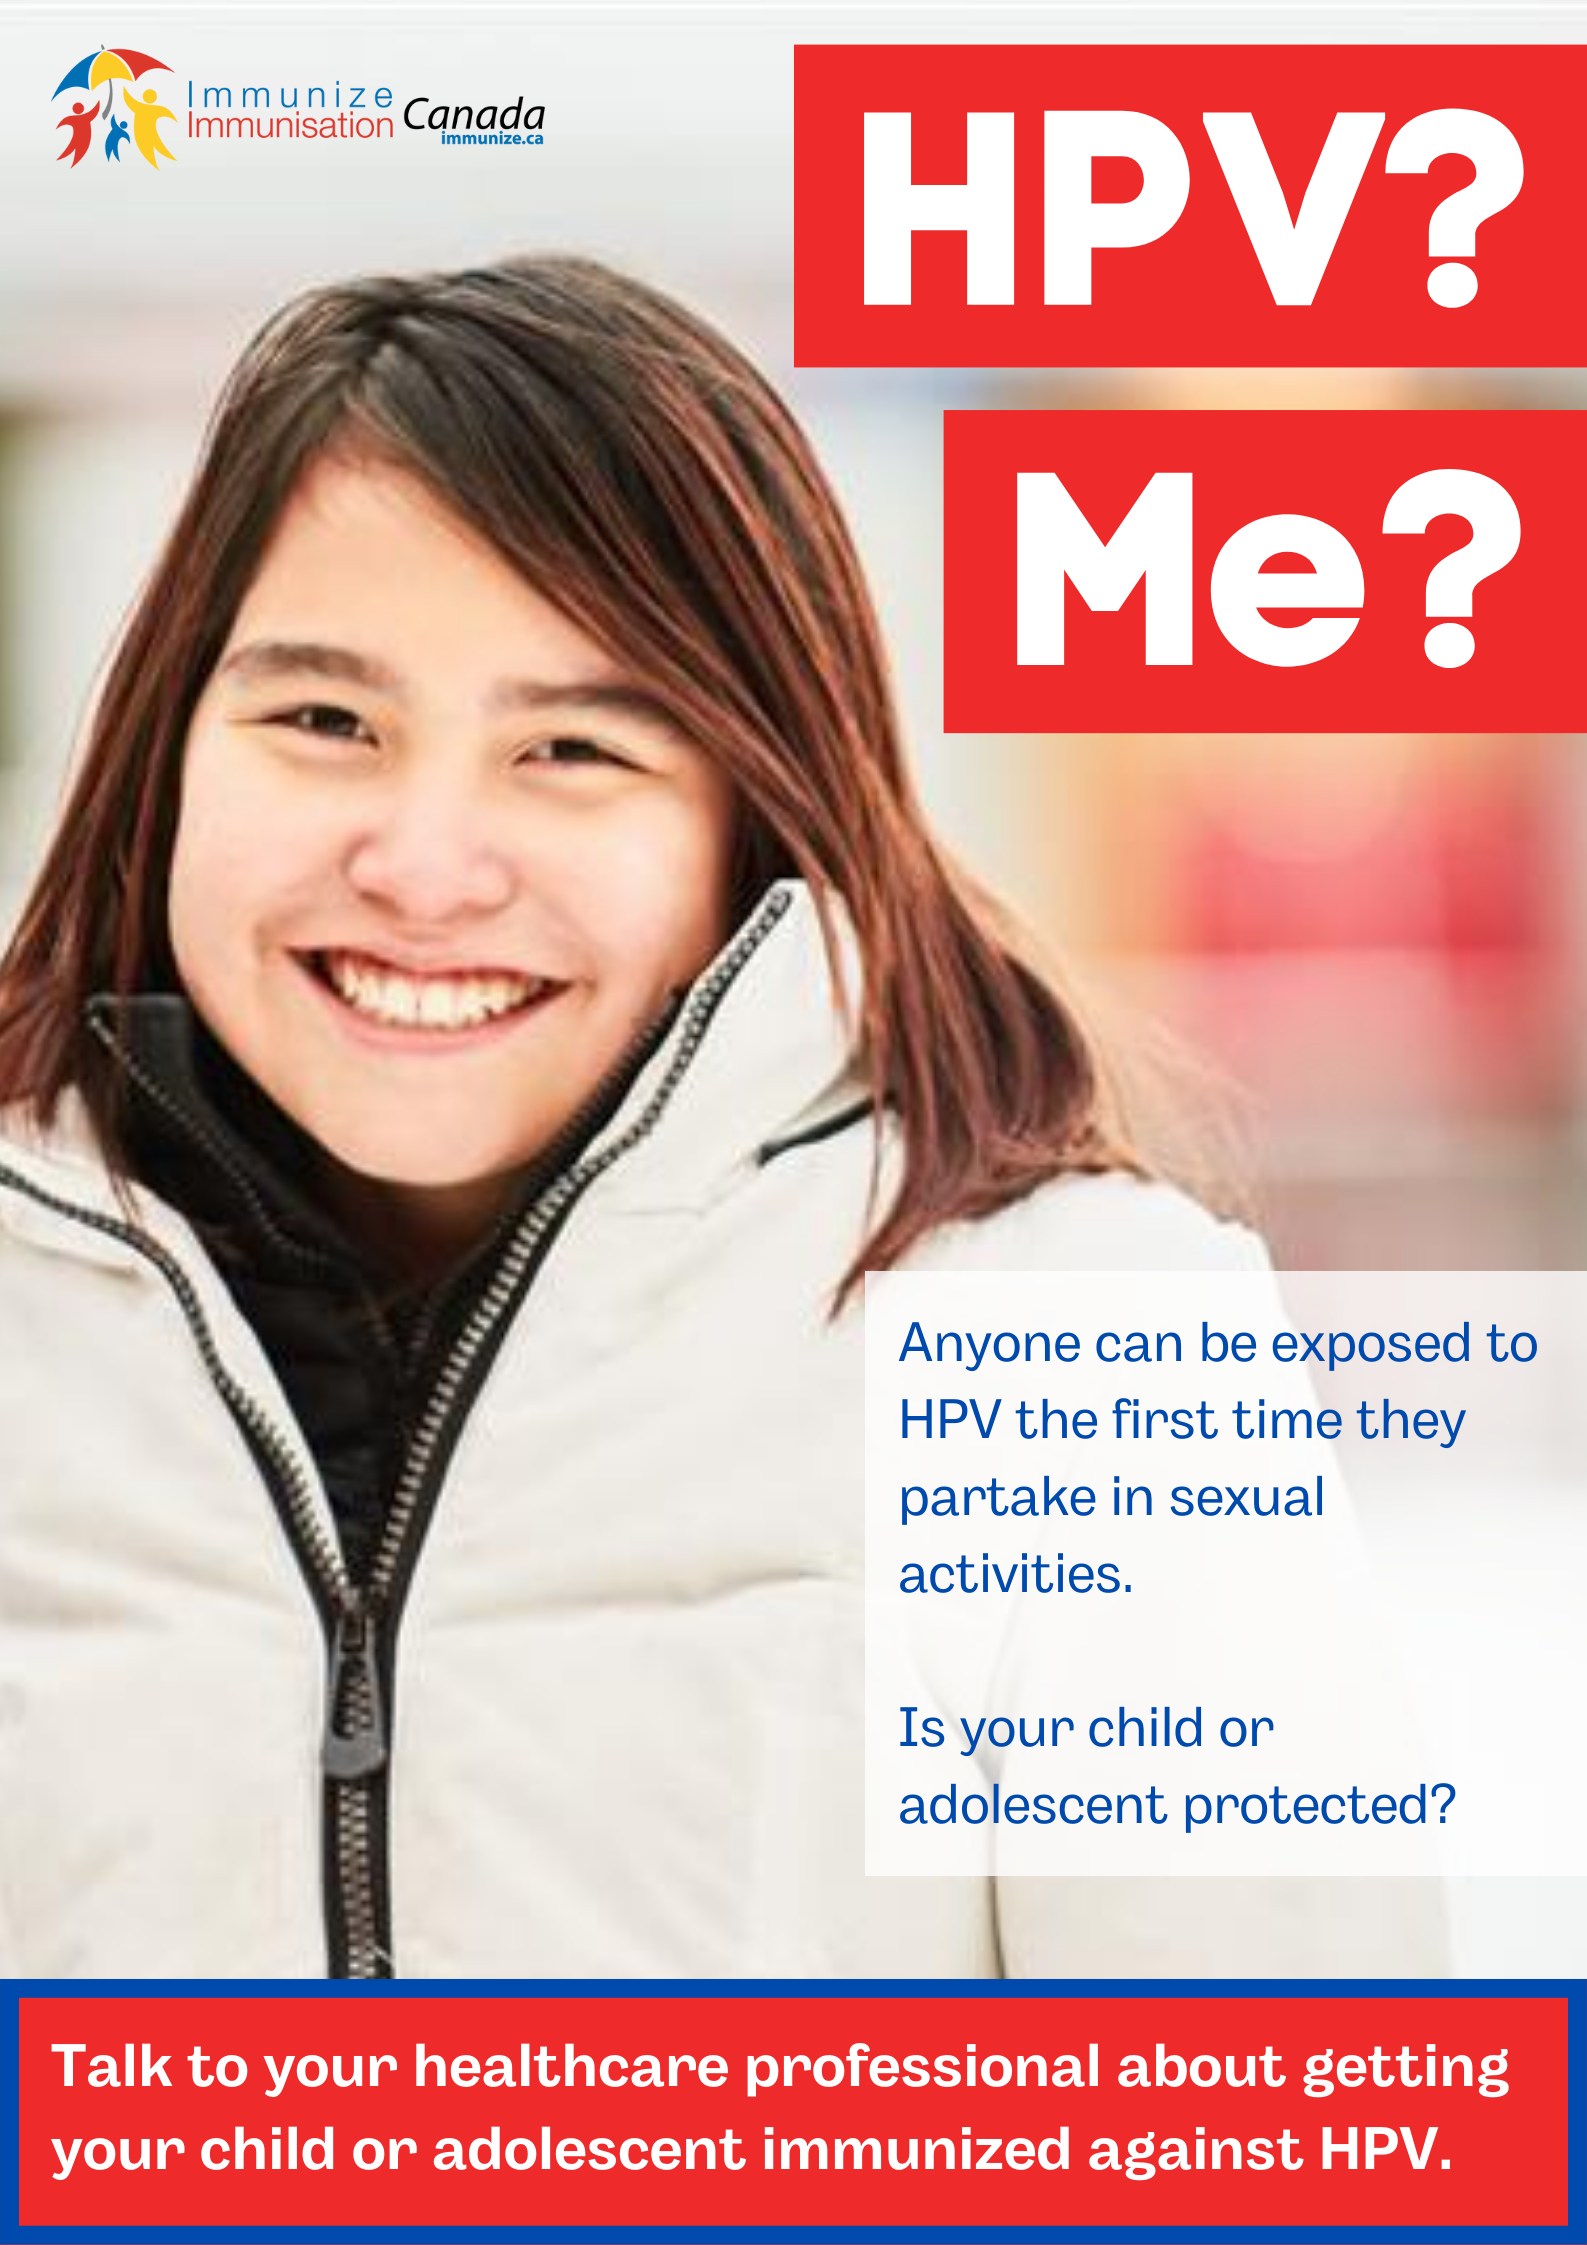 HPV? Me? (poster 4)